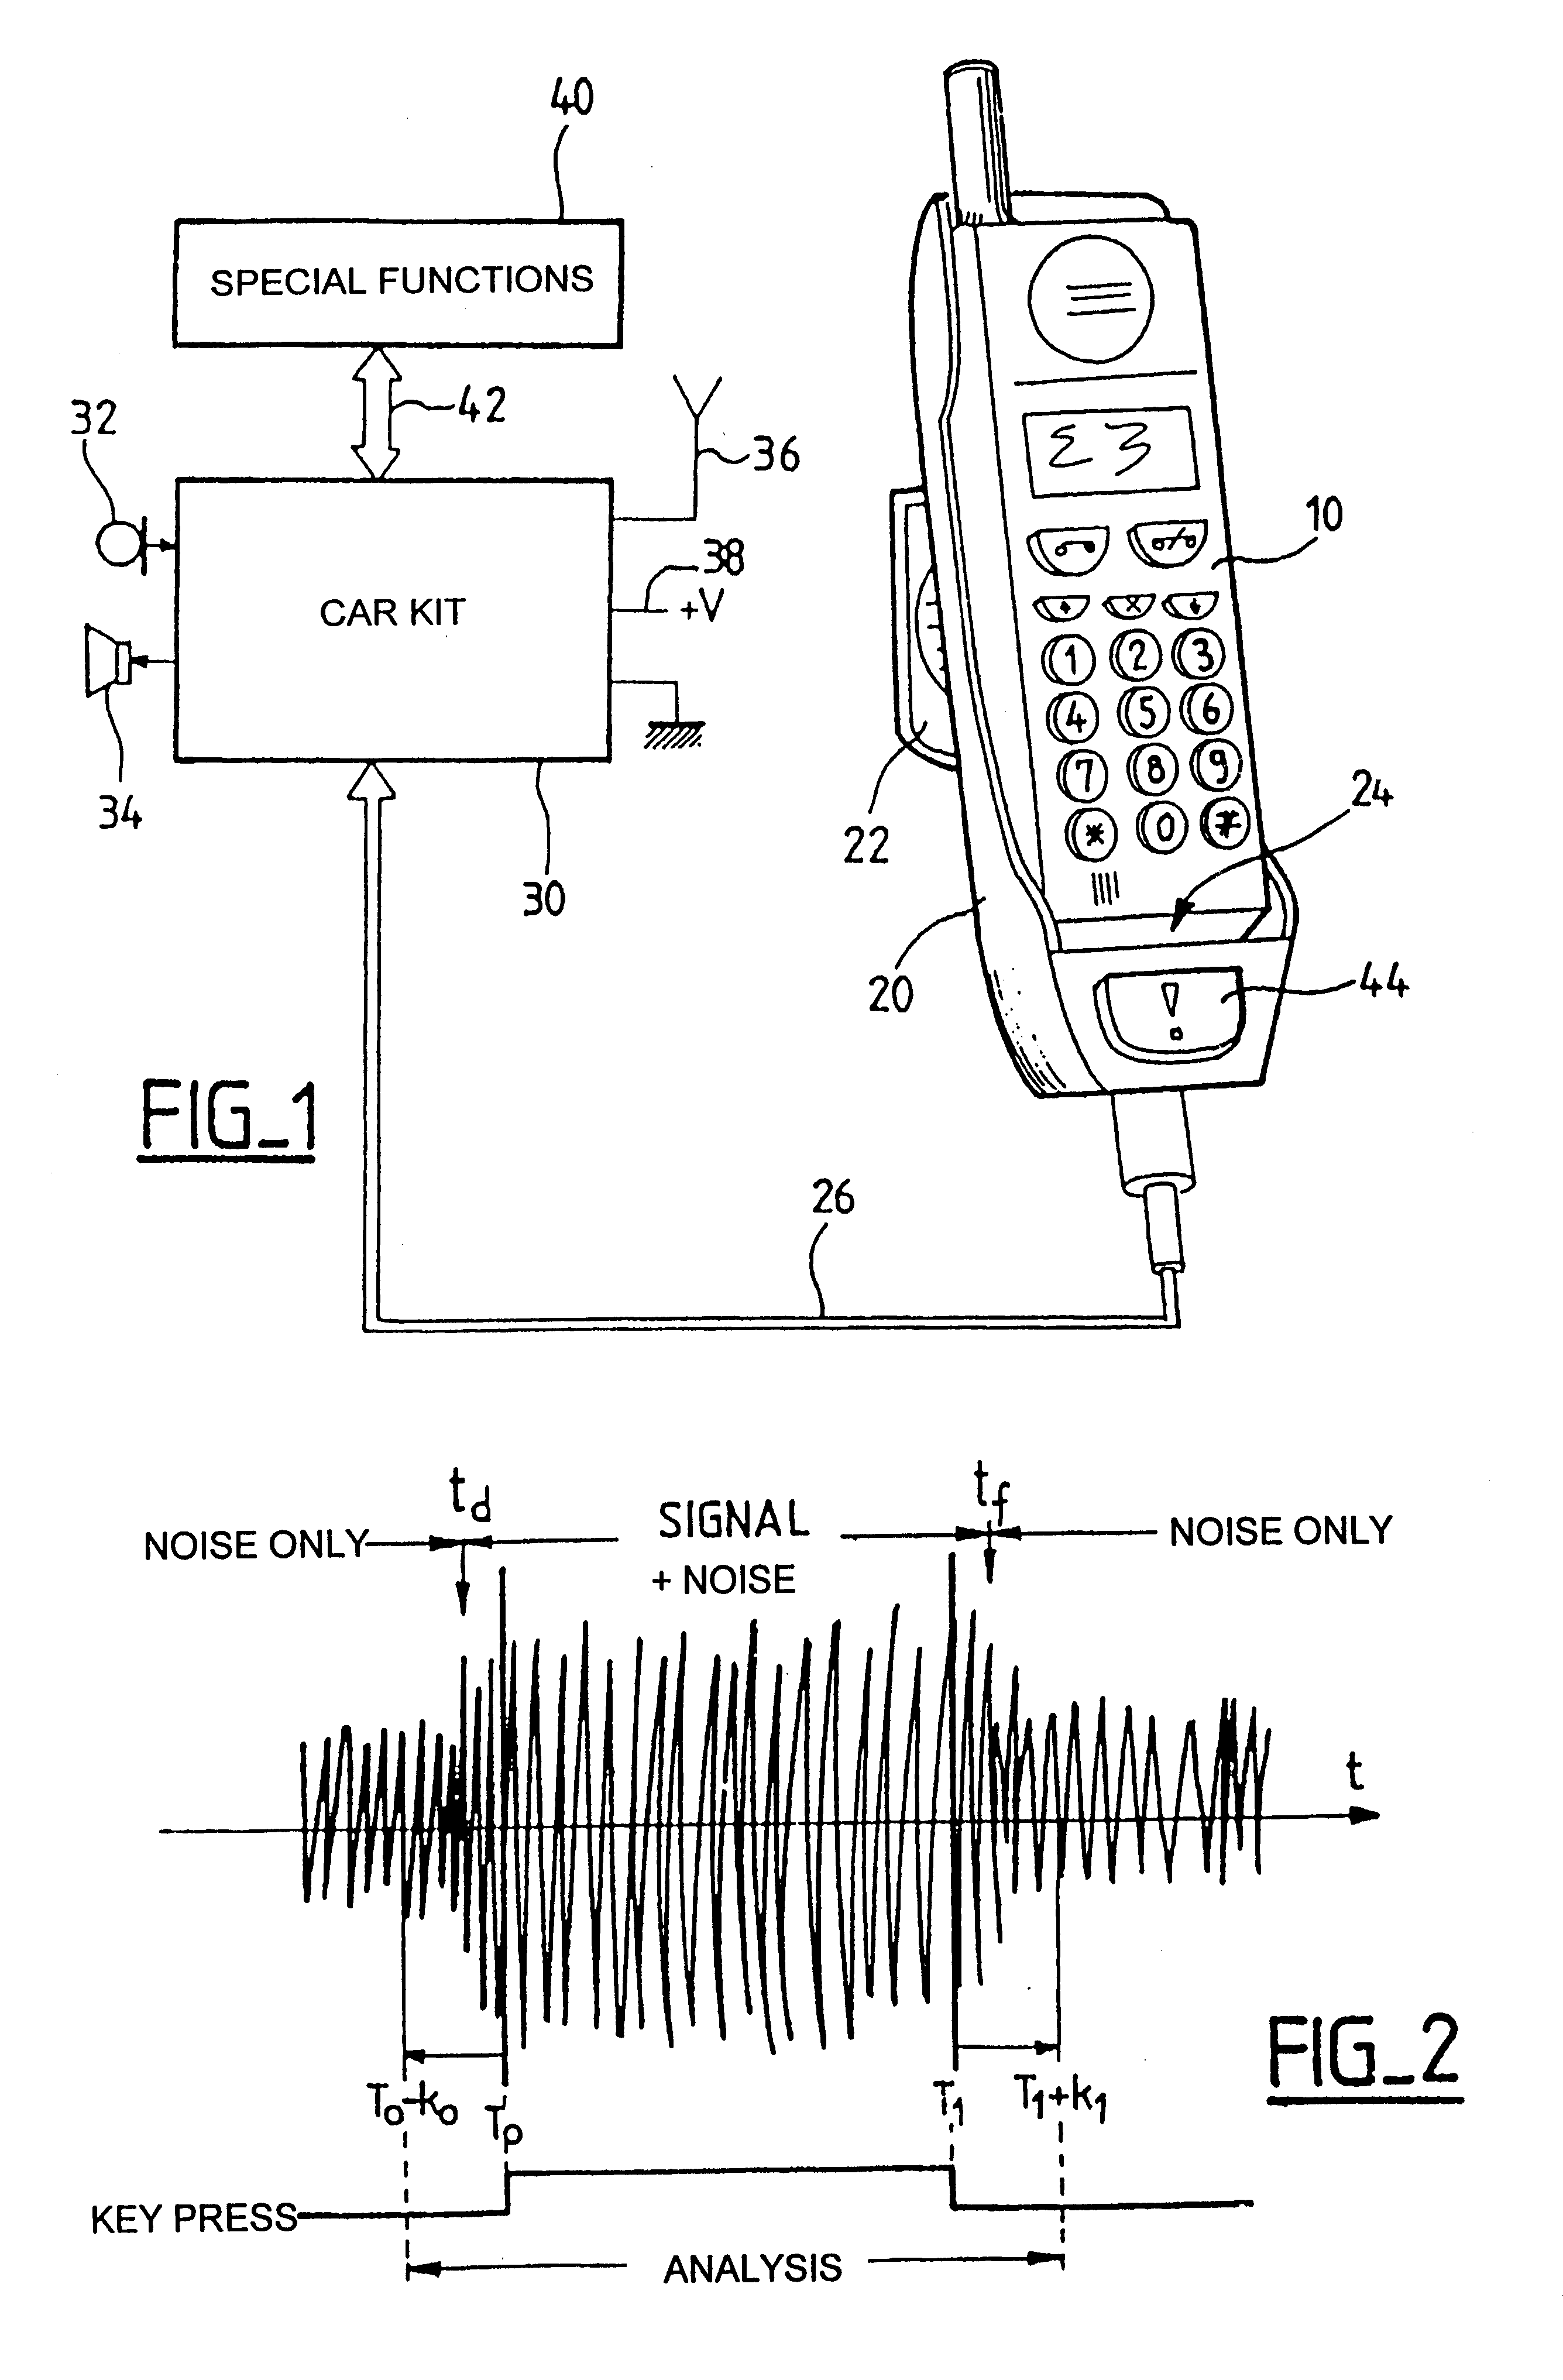 Radiotelephone voice control device, in particular for use in a motor vehicle